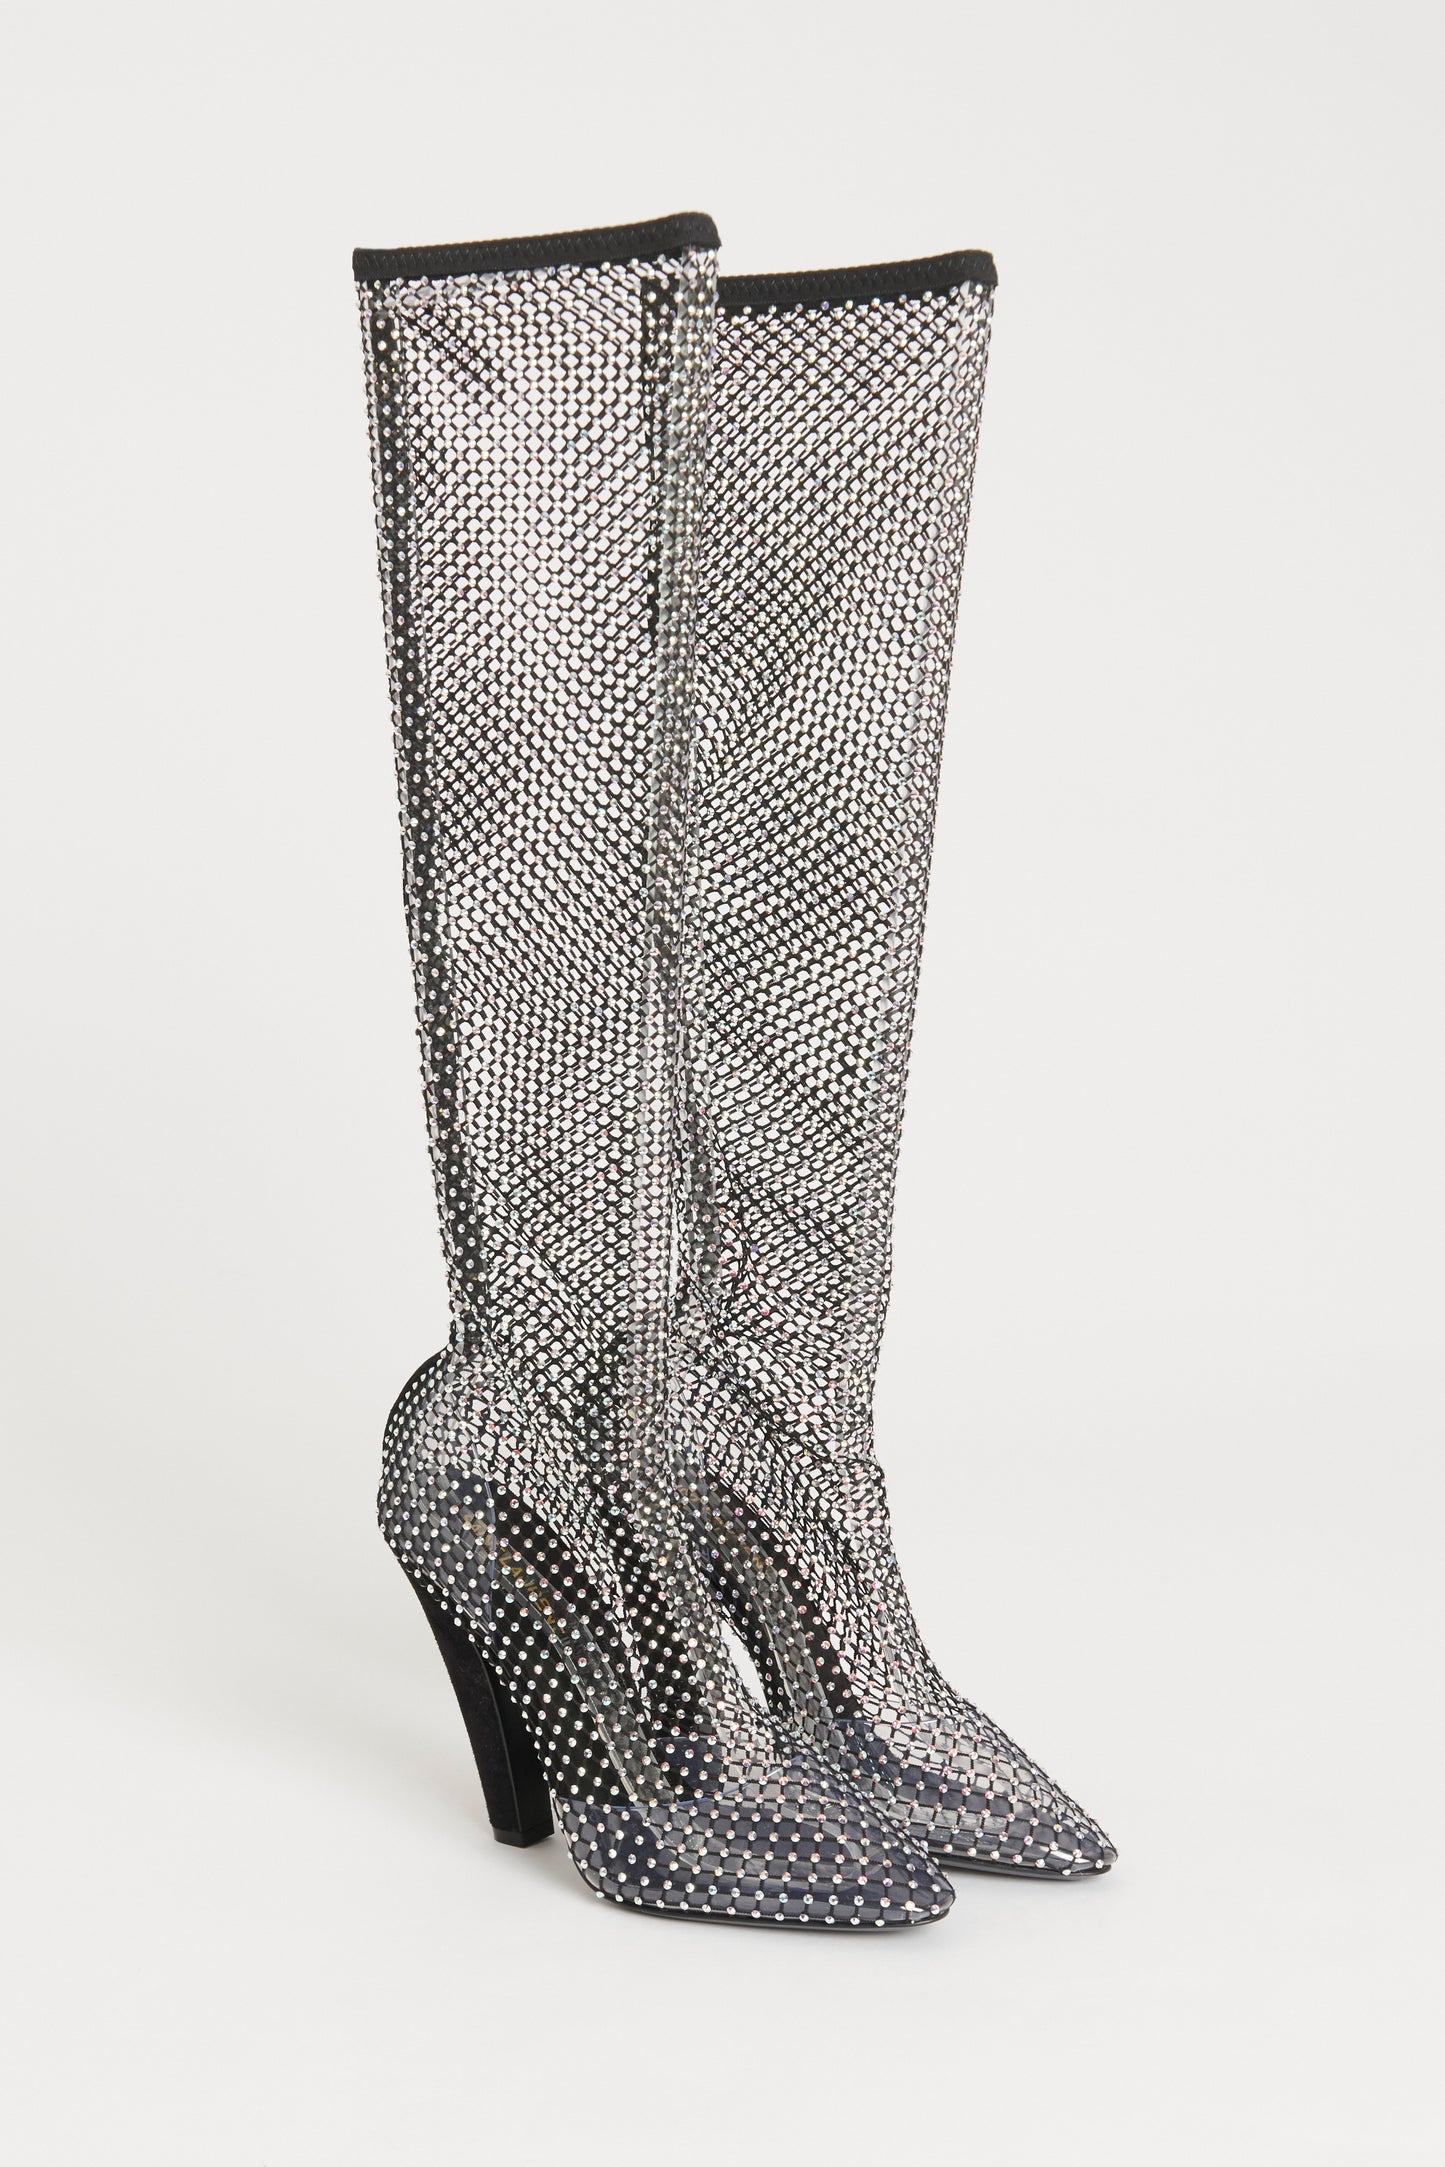 Black Mesh Preowned 68 Diamante Over the Knee Boots